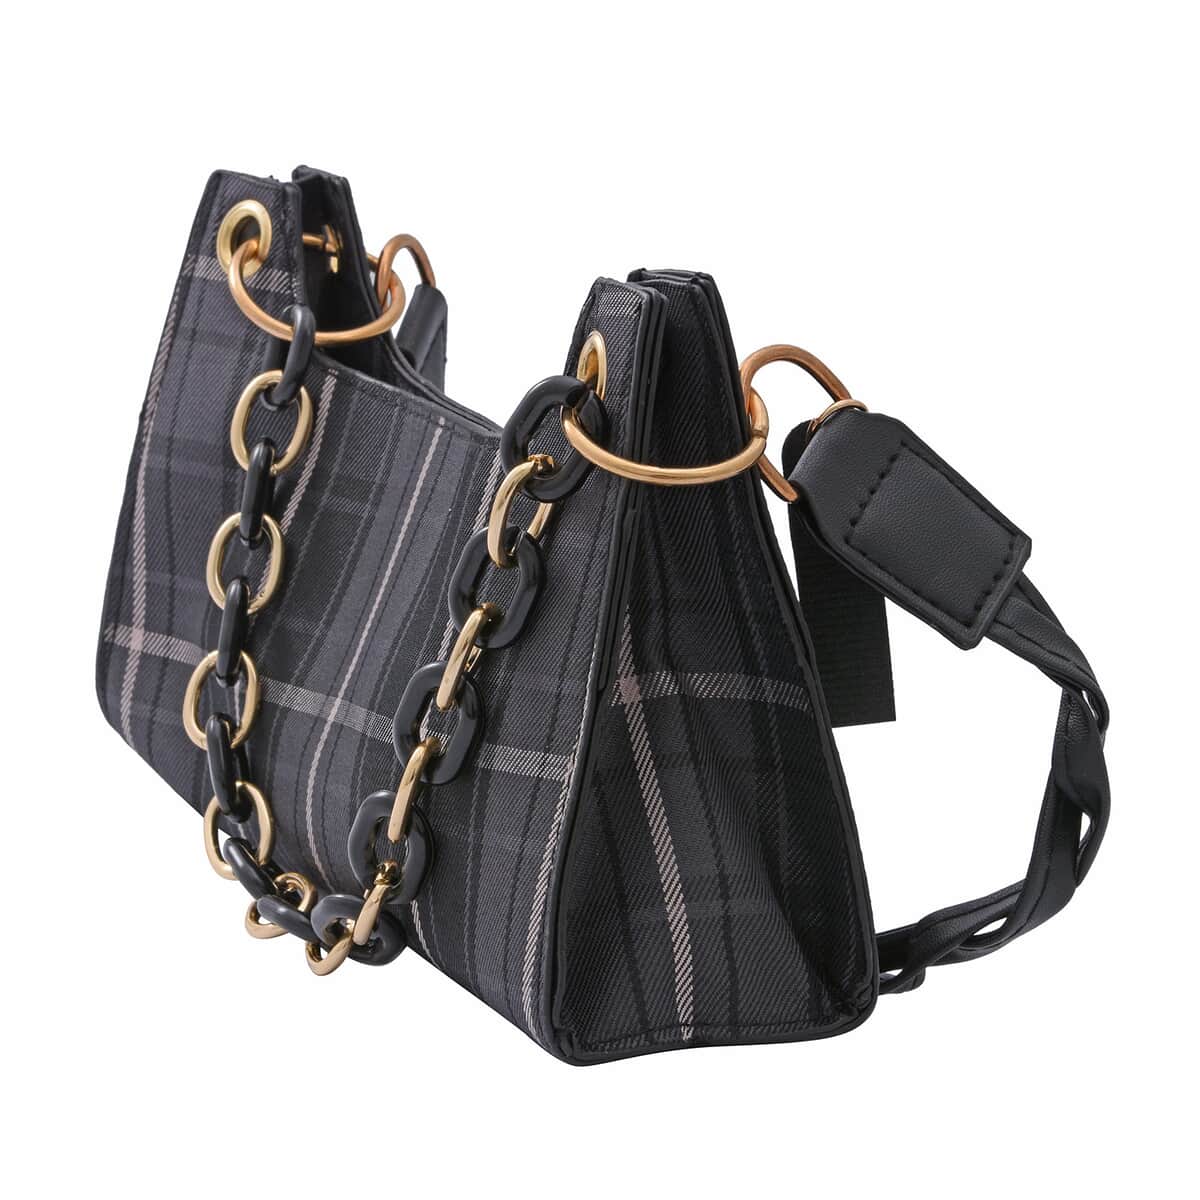 ROYAL SIAMESE Black Color Check Pattern Faux Leather Mini Handbag (3.72"x2.01"x1.08") with Handle Drop and Shoulder Strap image number 6